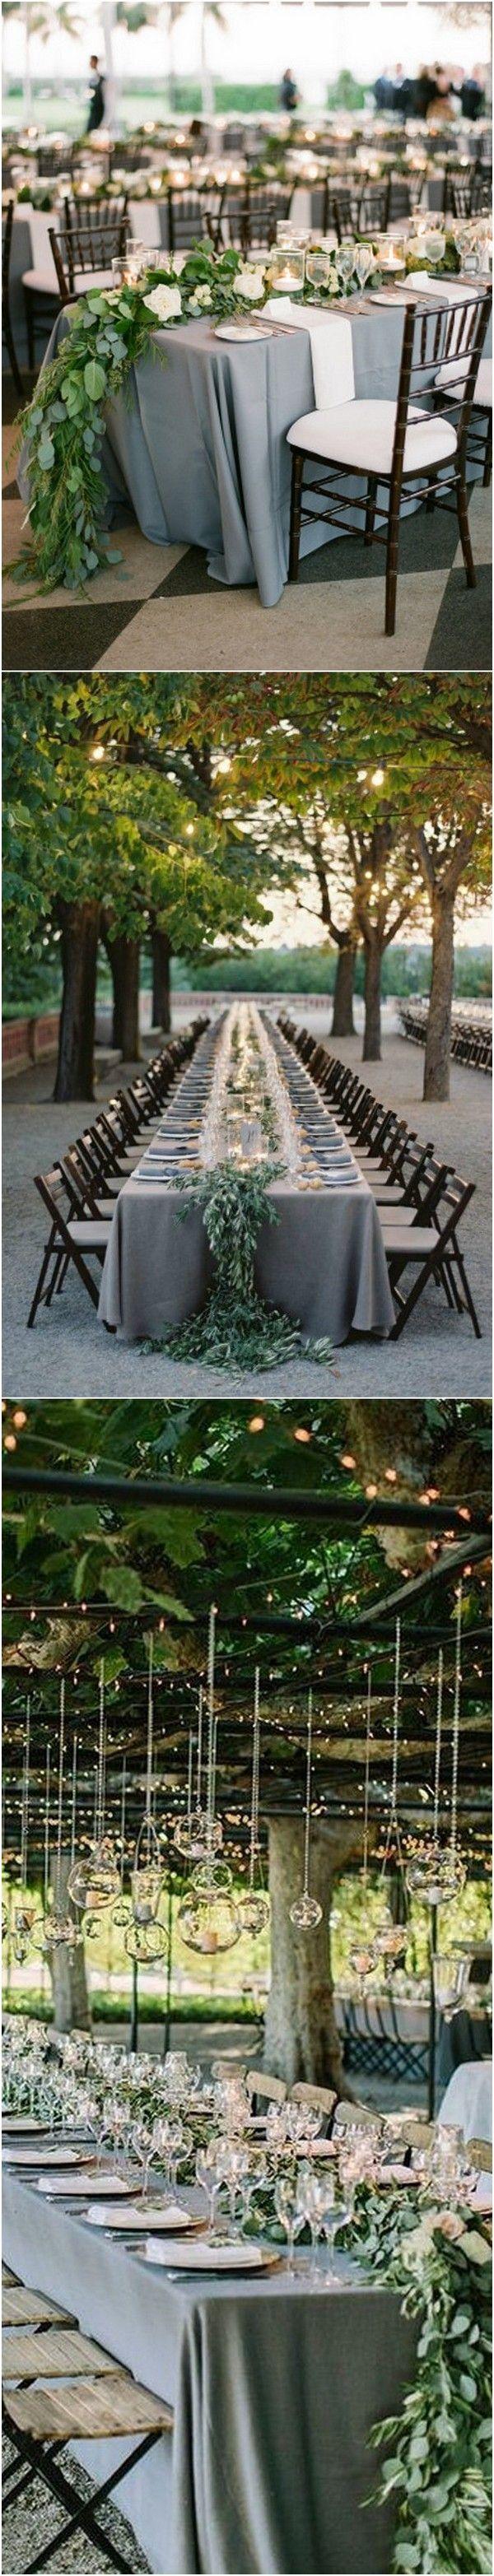 Wedding - Trending-21 Elegant Green And Grey Wedding Color Ideas For 2018 - Page 4 Of 4